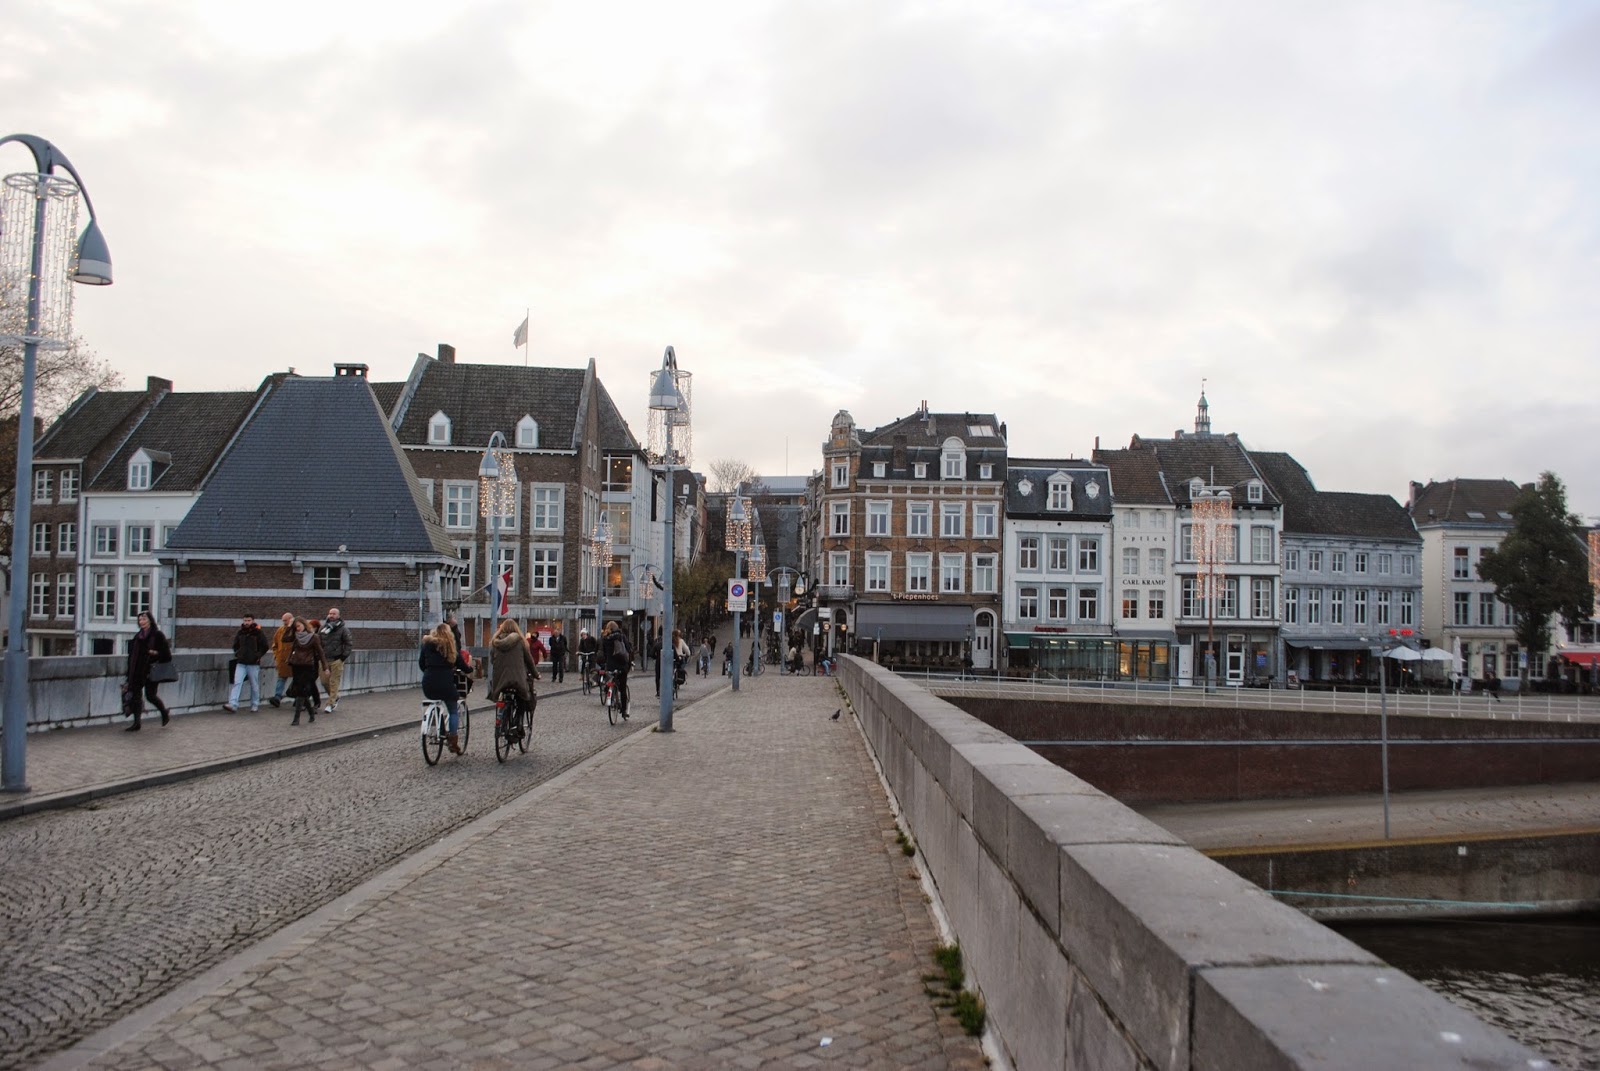 A view of buildings in Maastricht, the Netherlands.